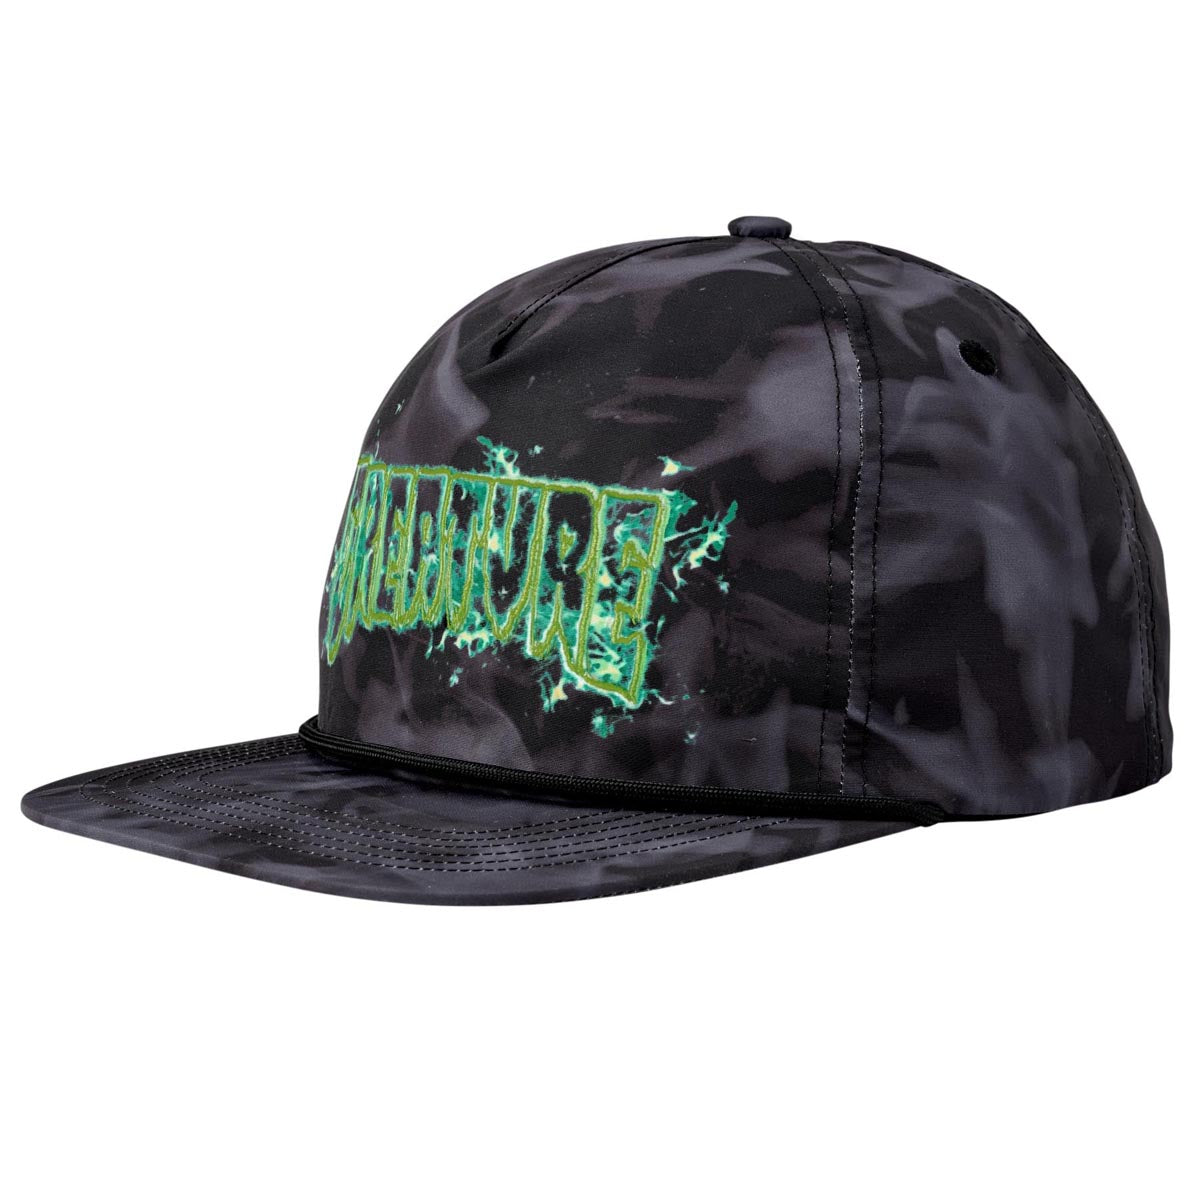 Creature Inferno Snapback Unstructured Hat - Black image 1